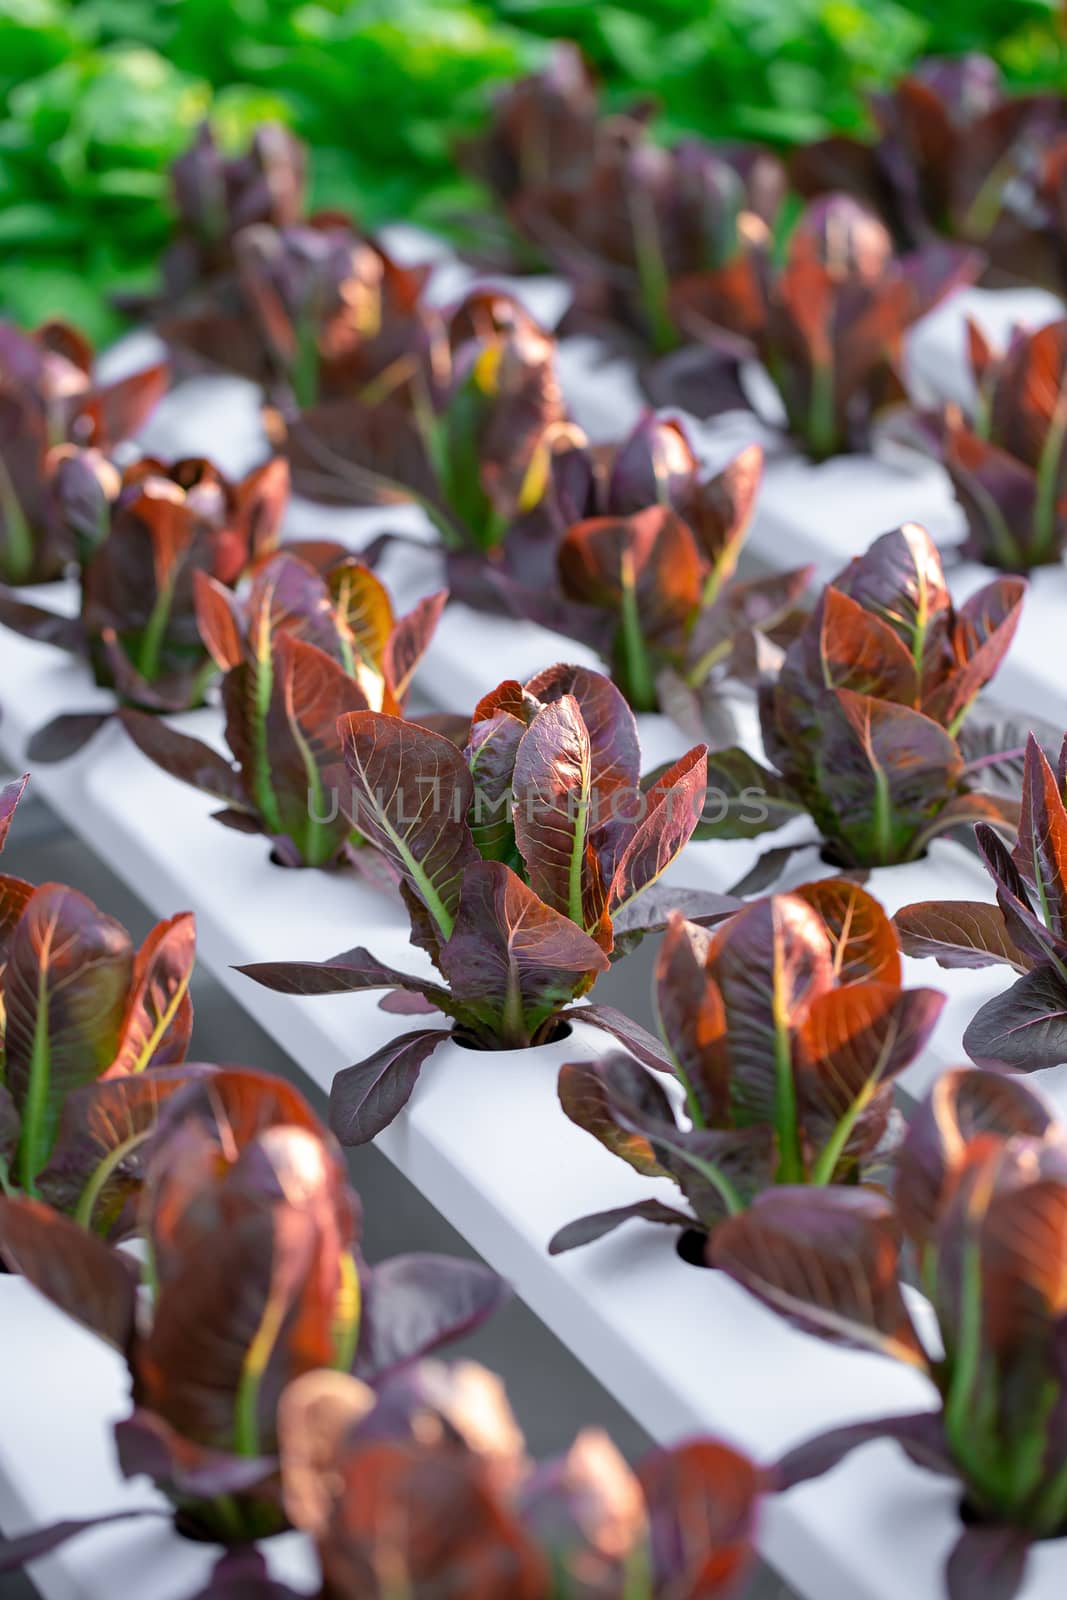 Red Cos lettuce leaves, Salads vegetable hydroponics farm by kaiskynet